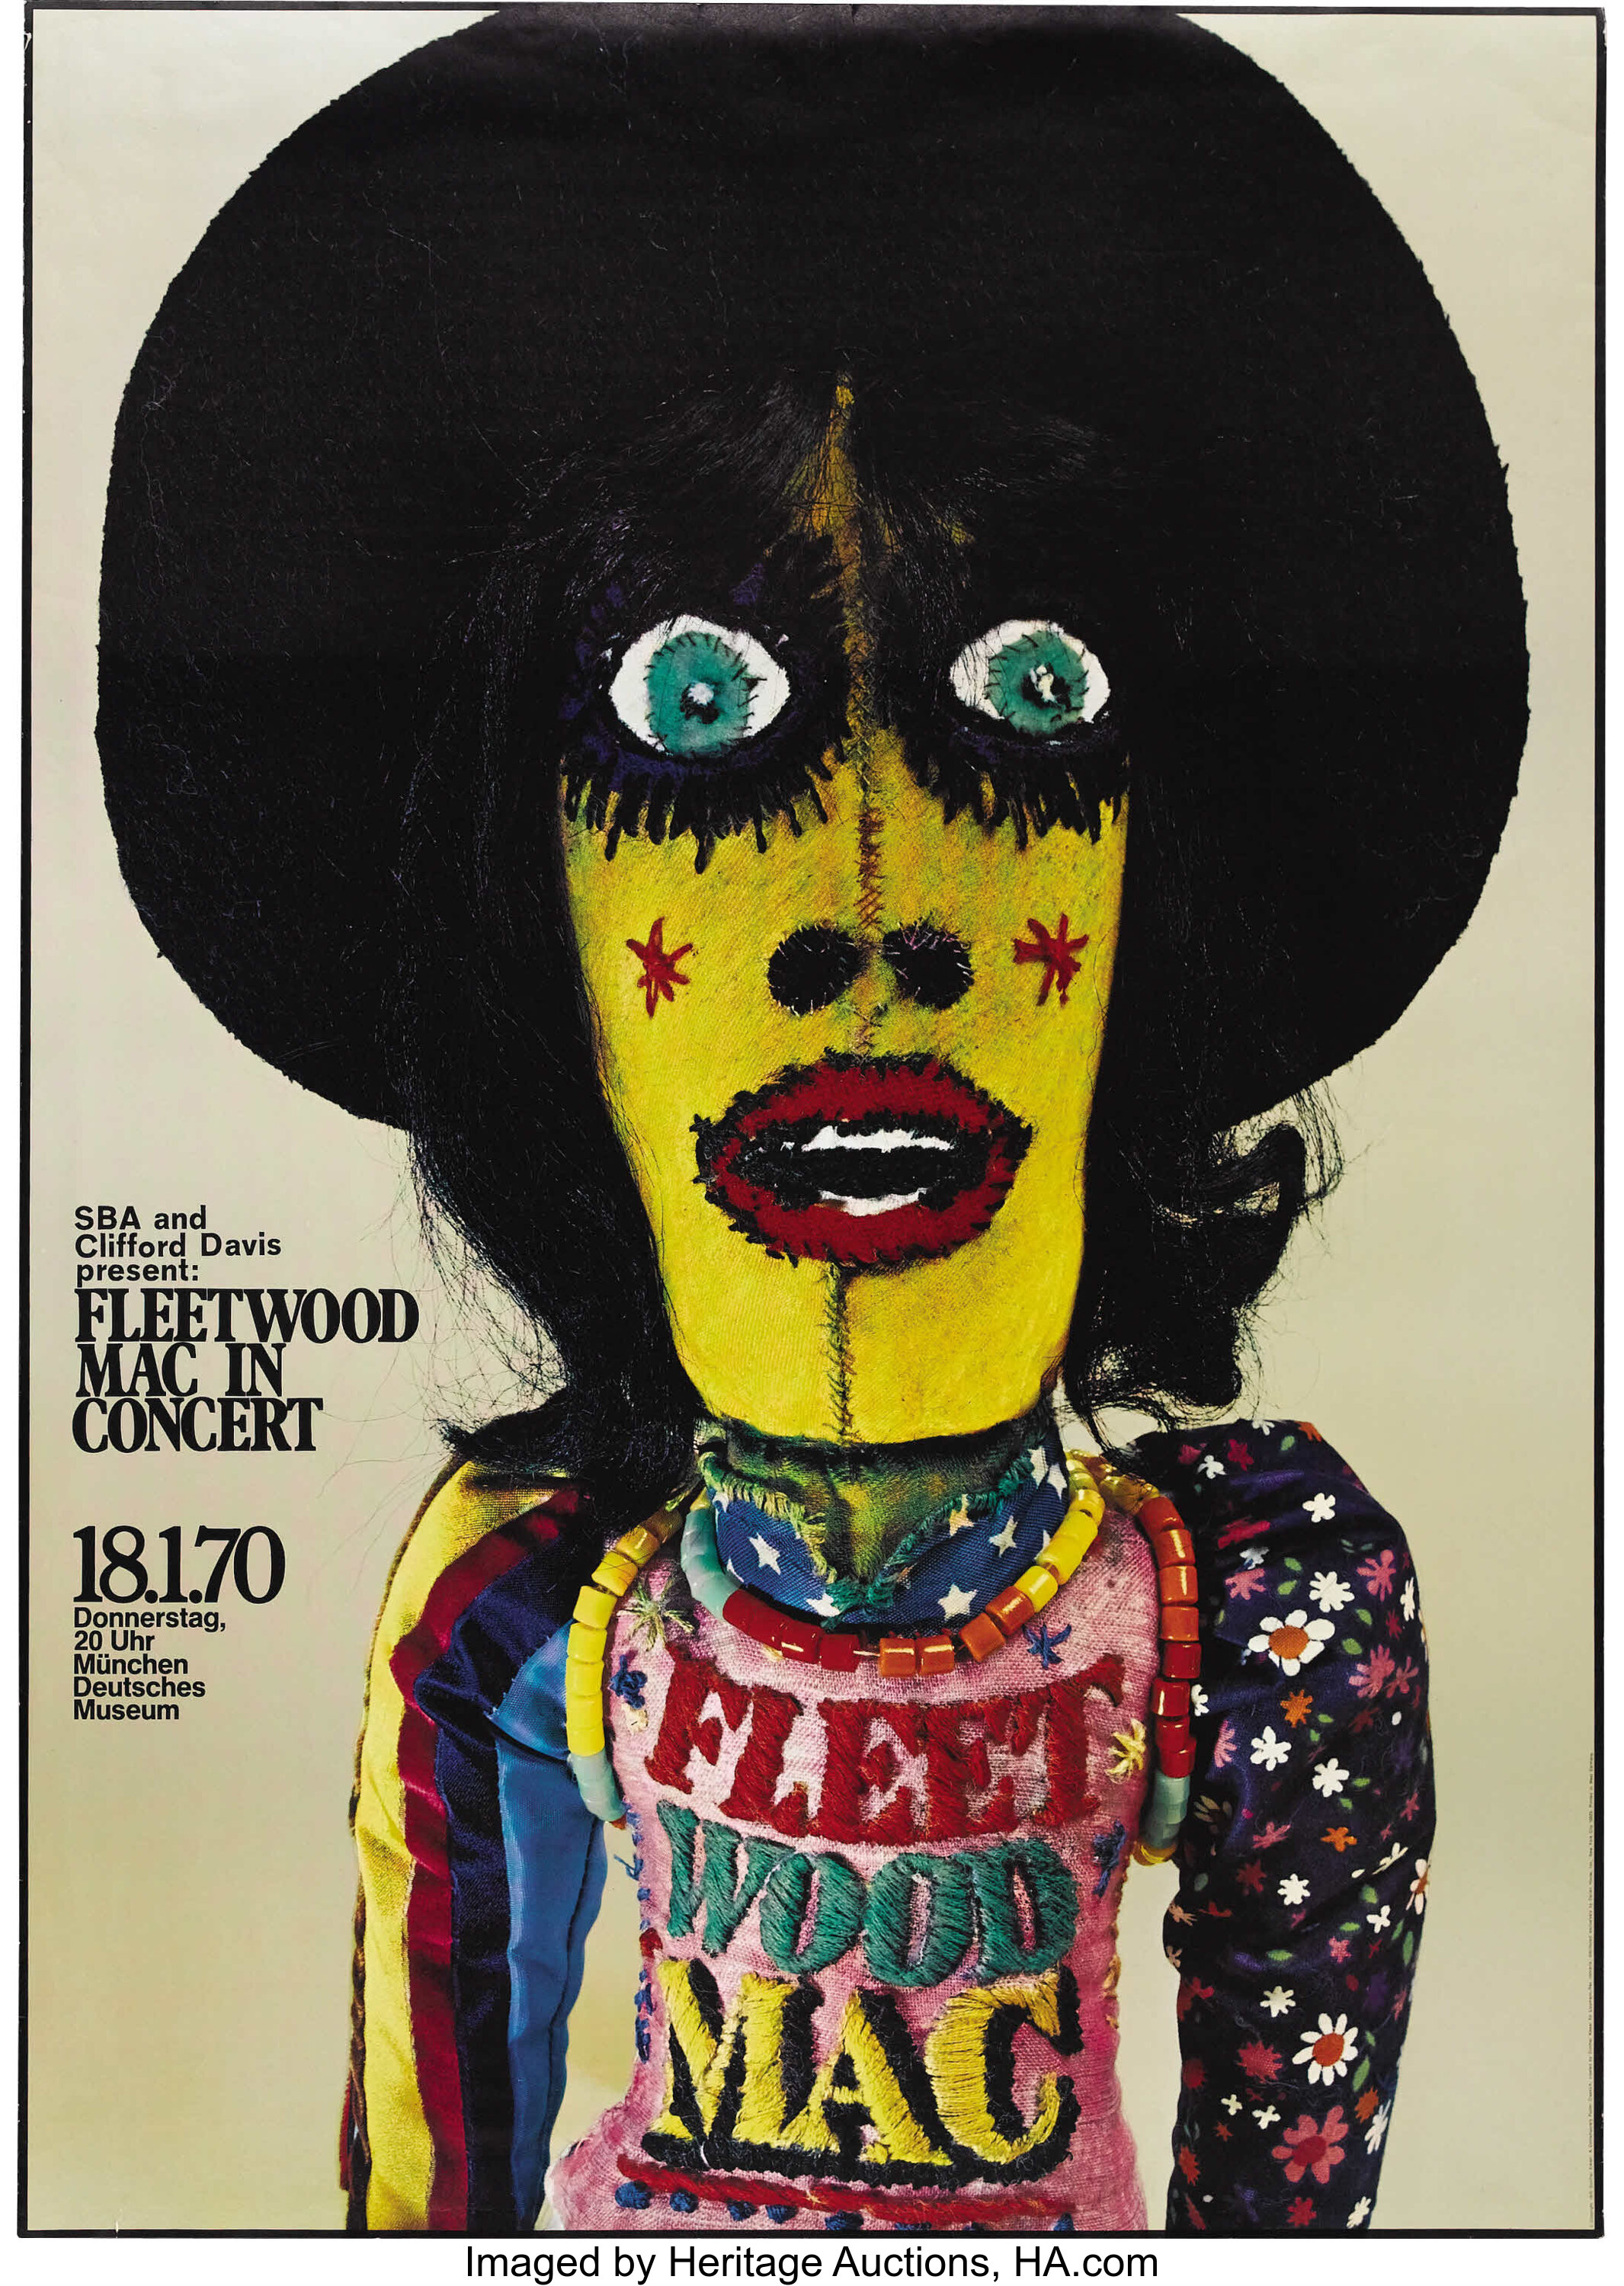 Fleetwood Mac Munich Concert Poster 1970 This Large Unusual Lot Heritage Auctions